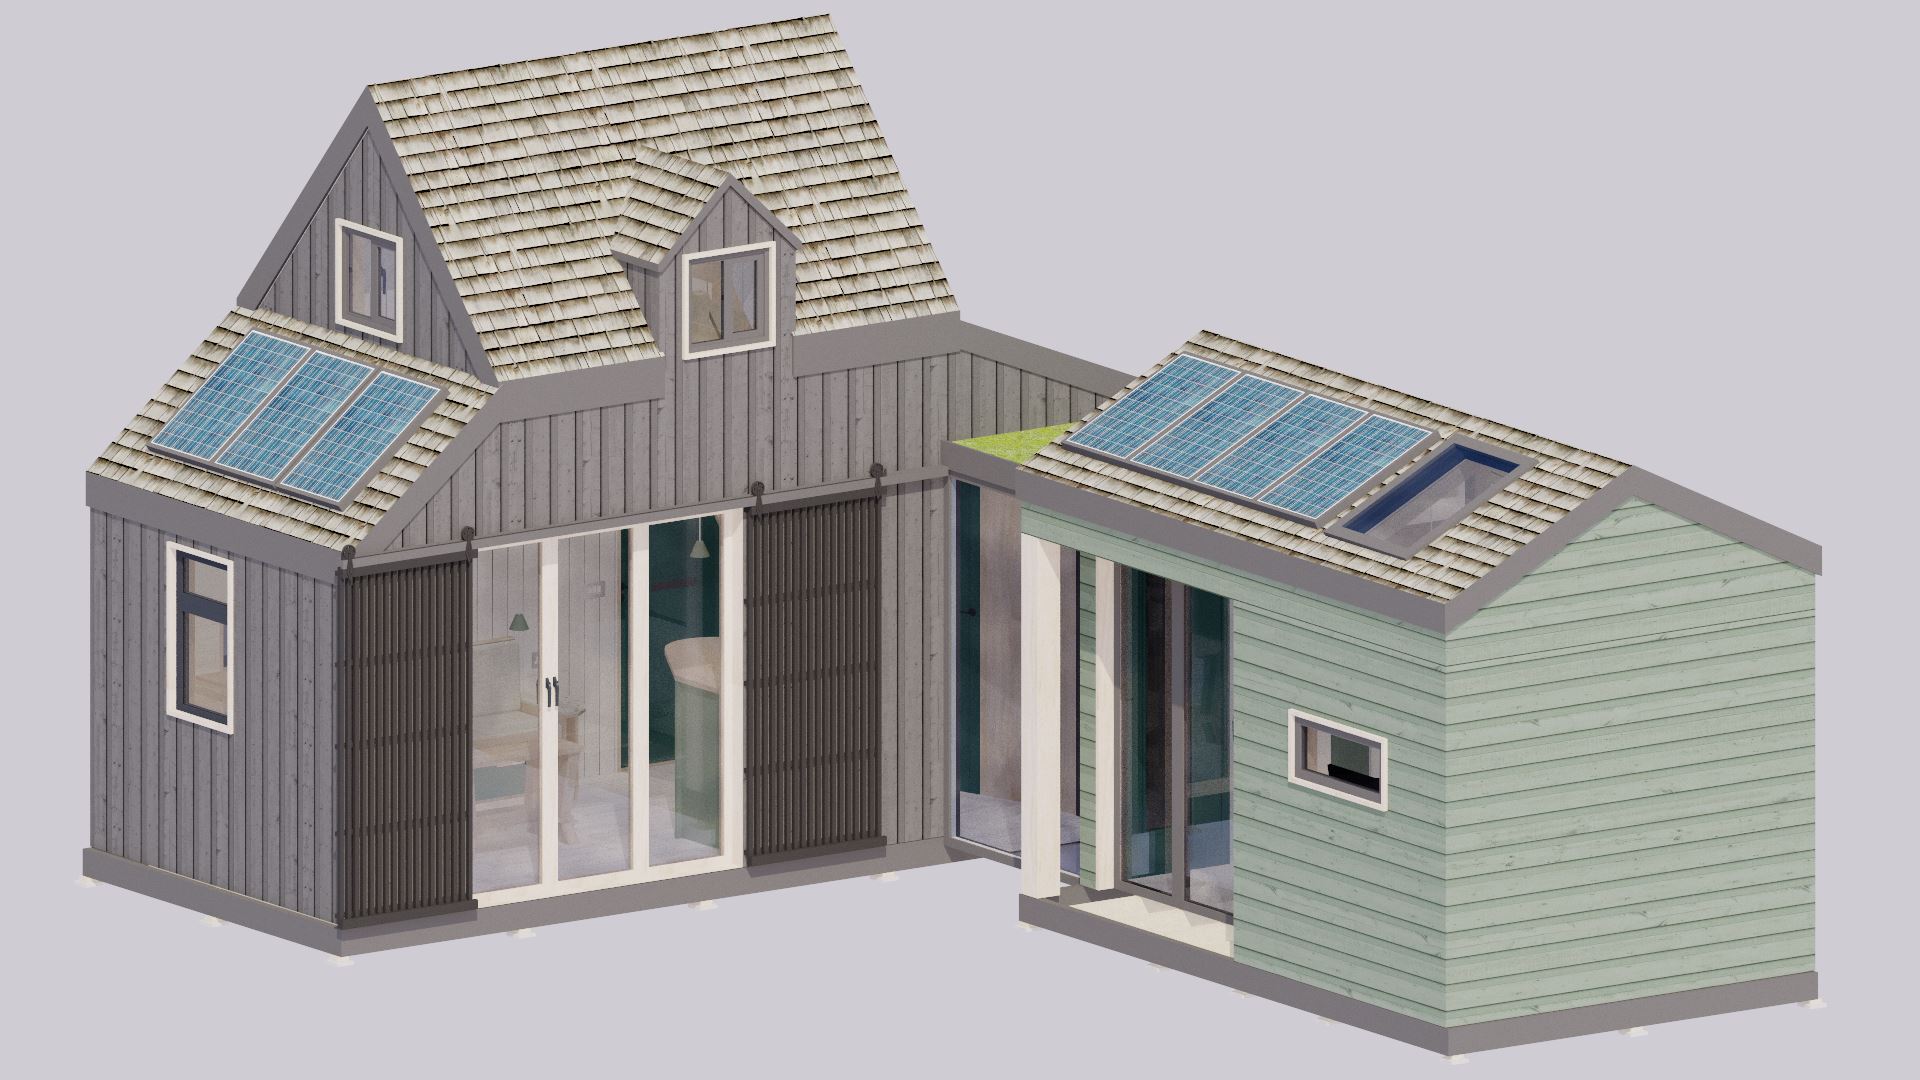 An isometric view of the tiny house and annexe without the scenery in place.